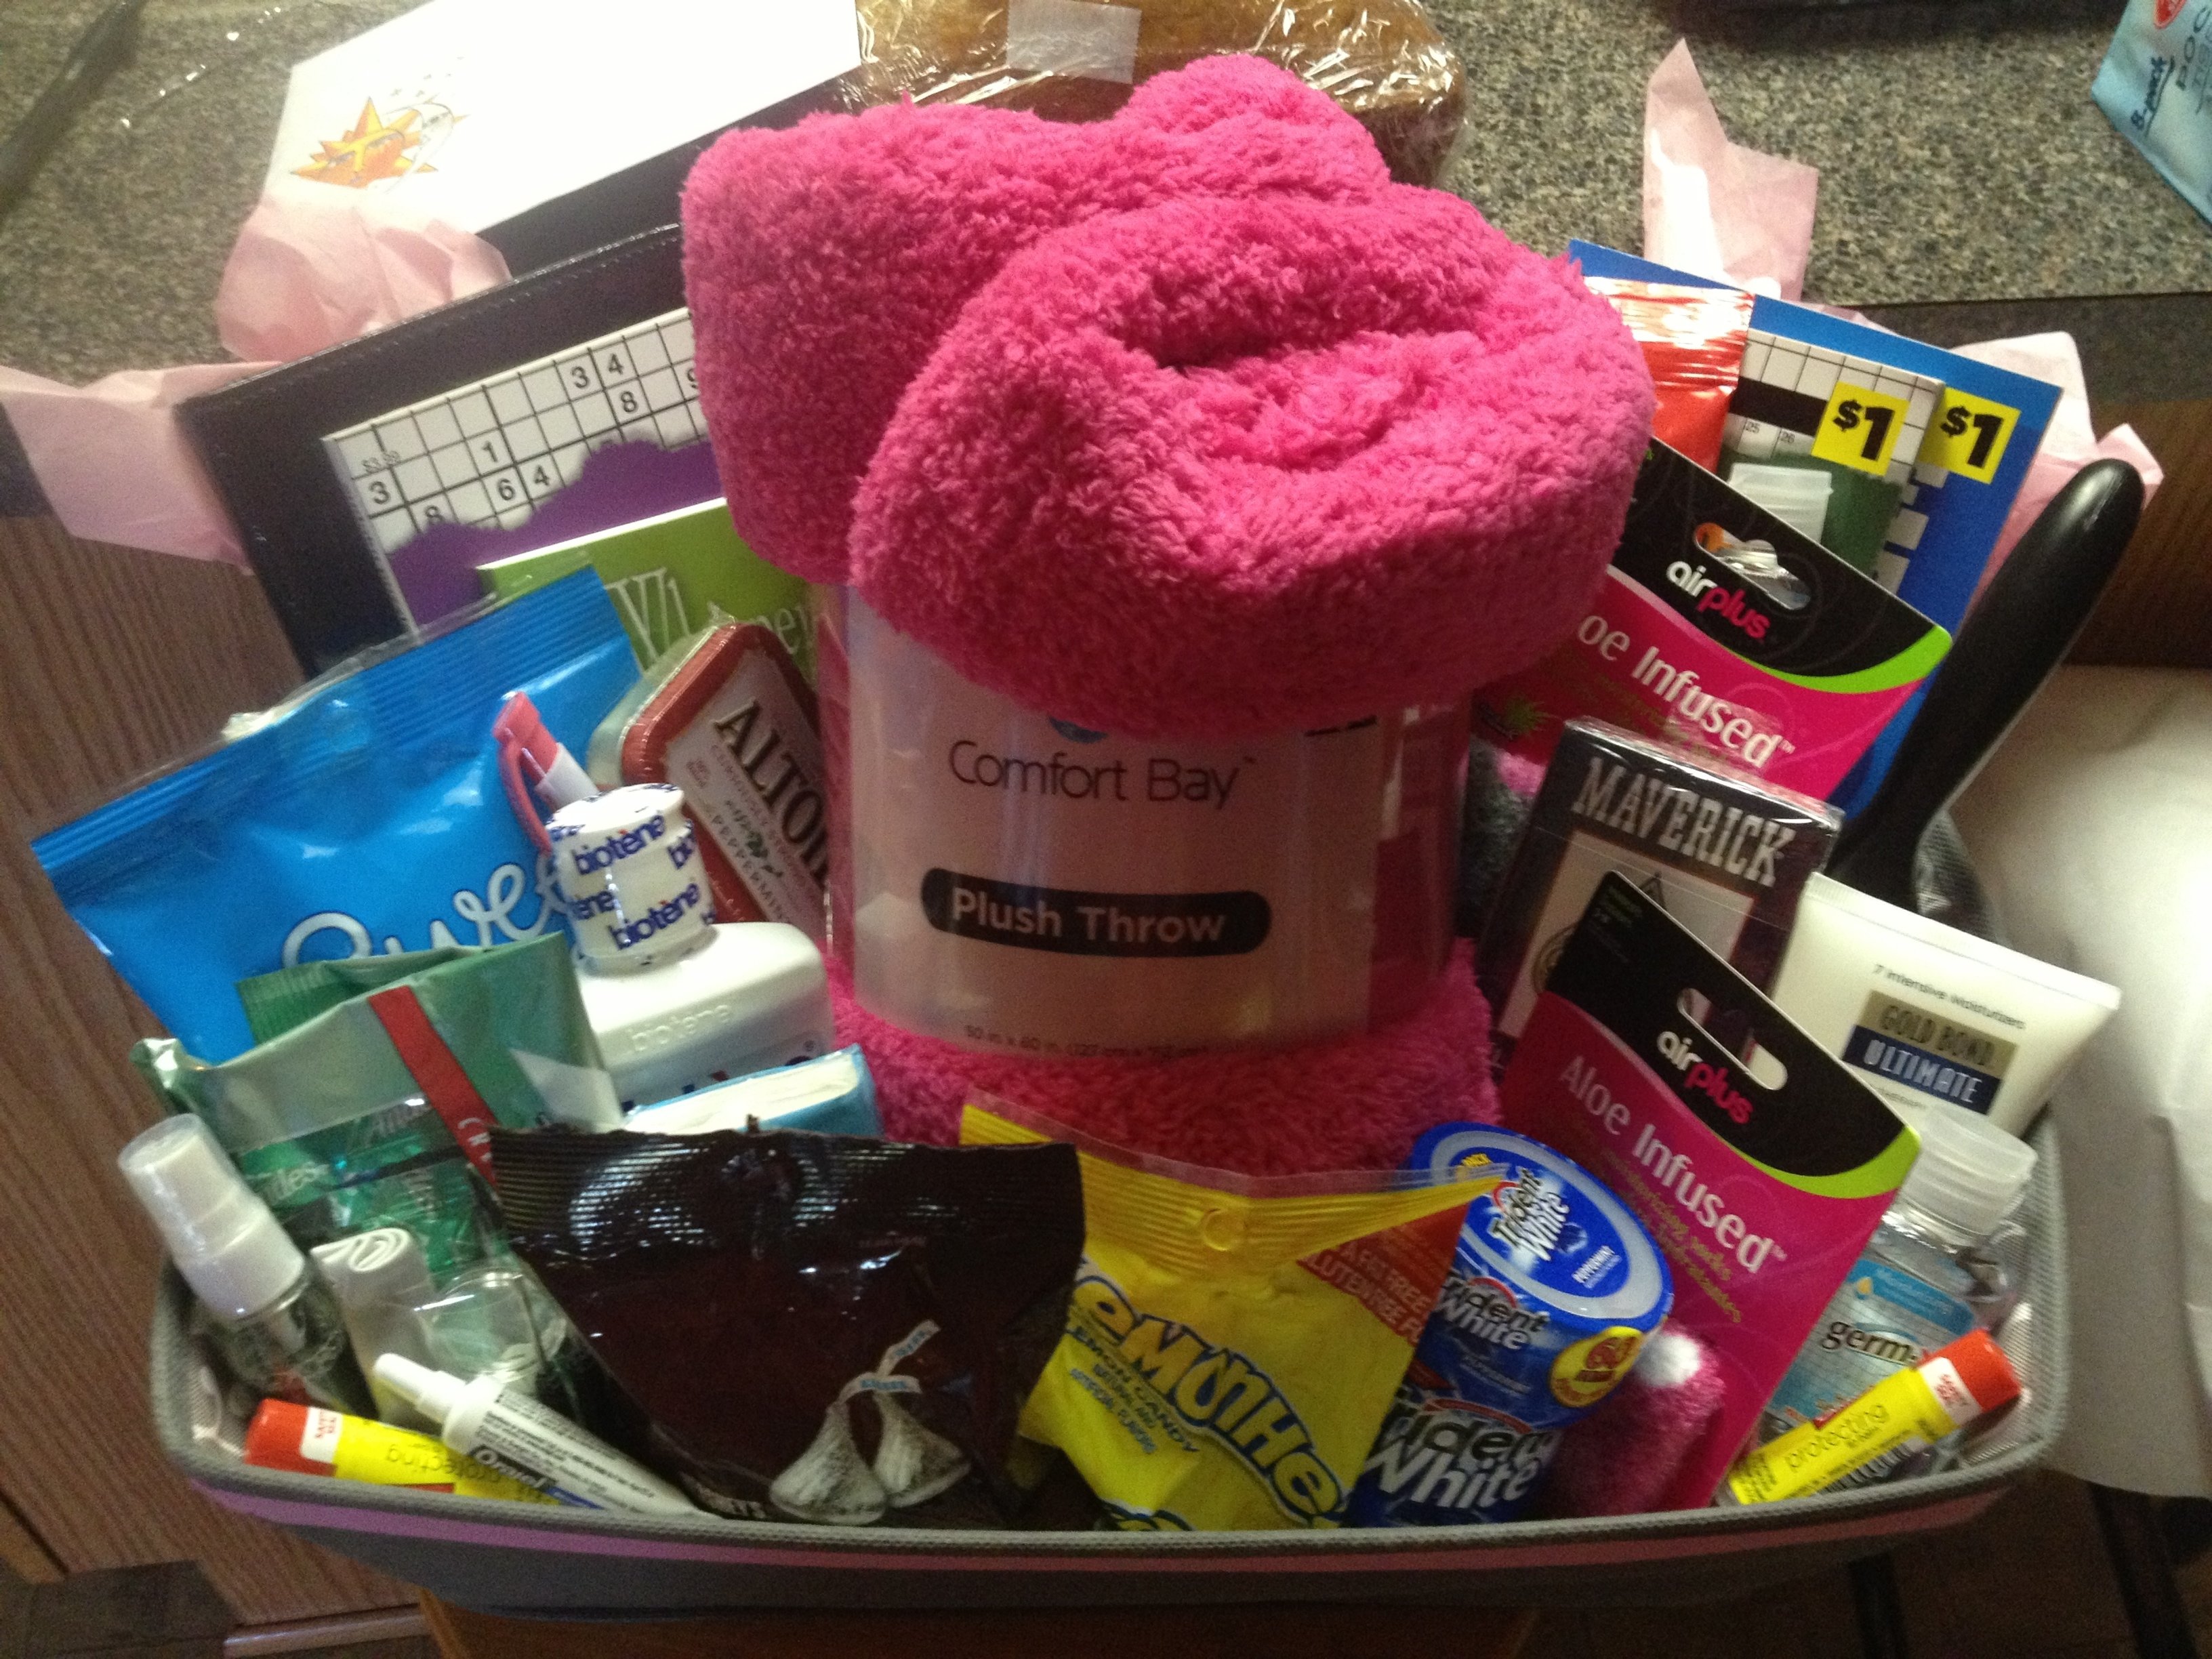 Thoughtful Cancer-Fighting Care Package